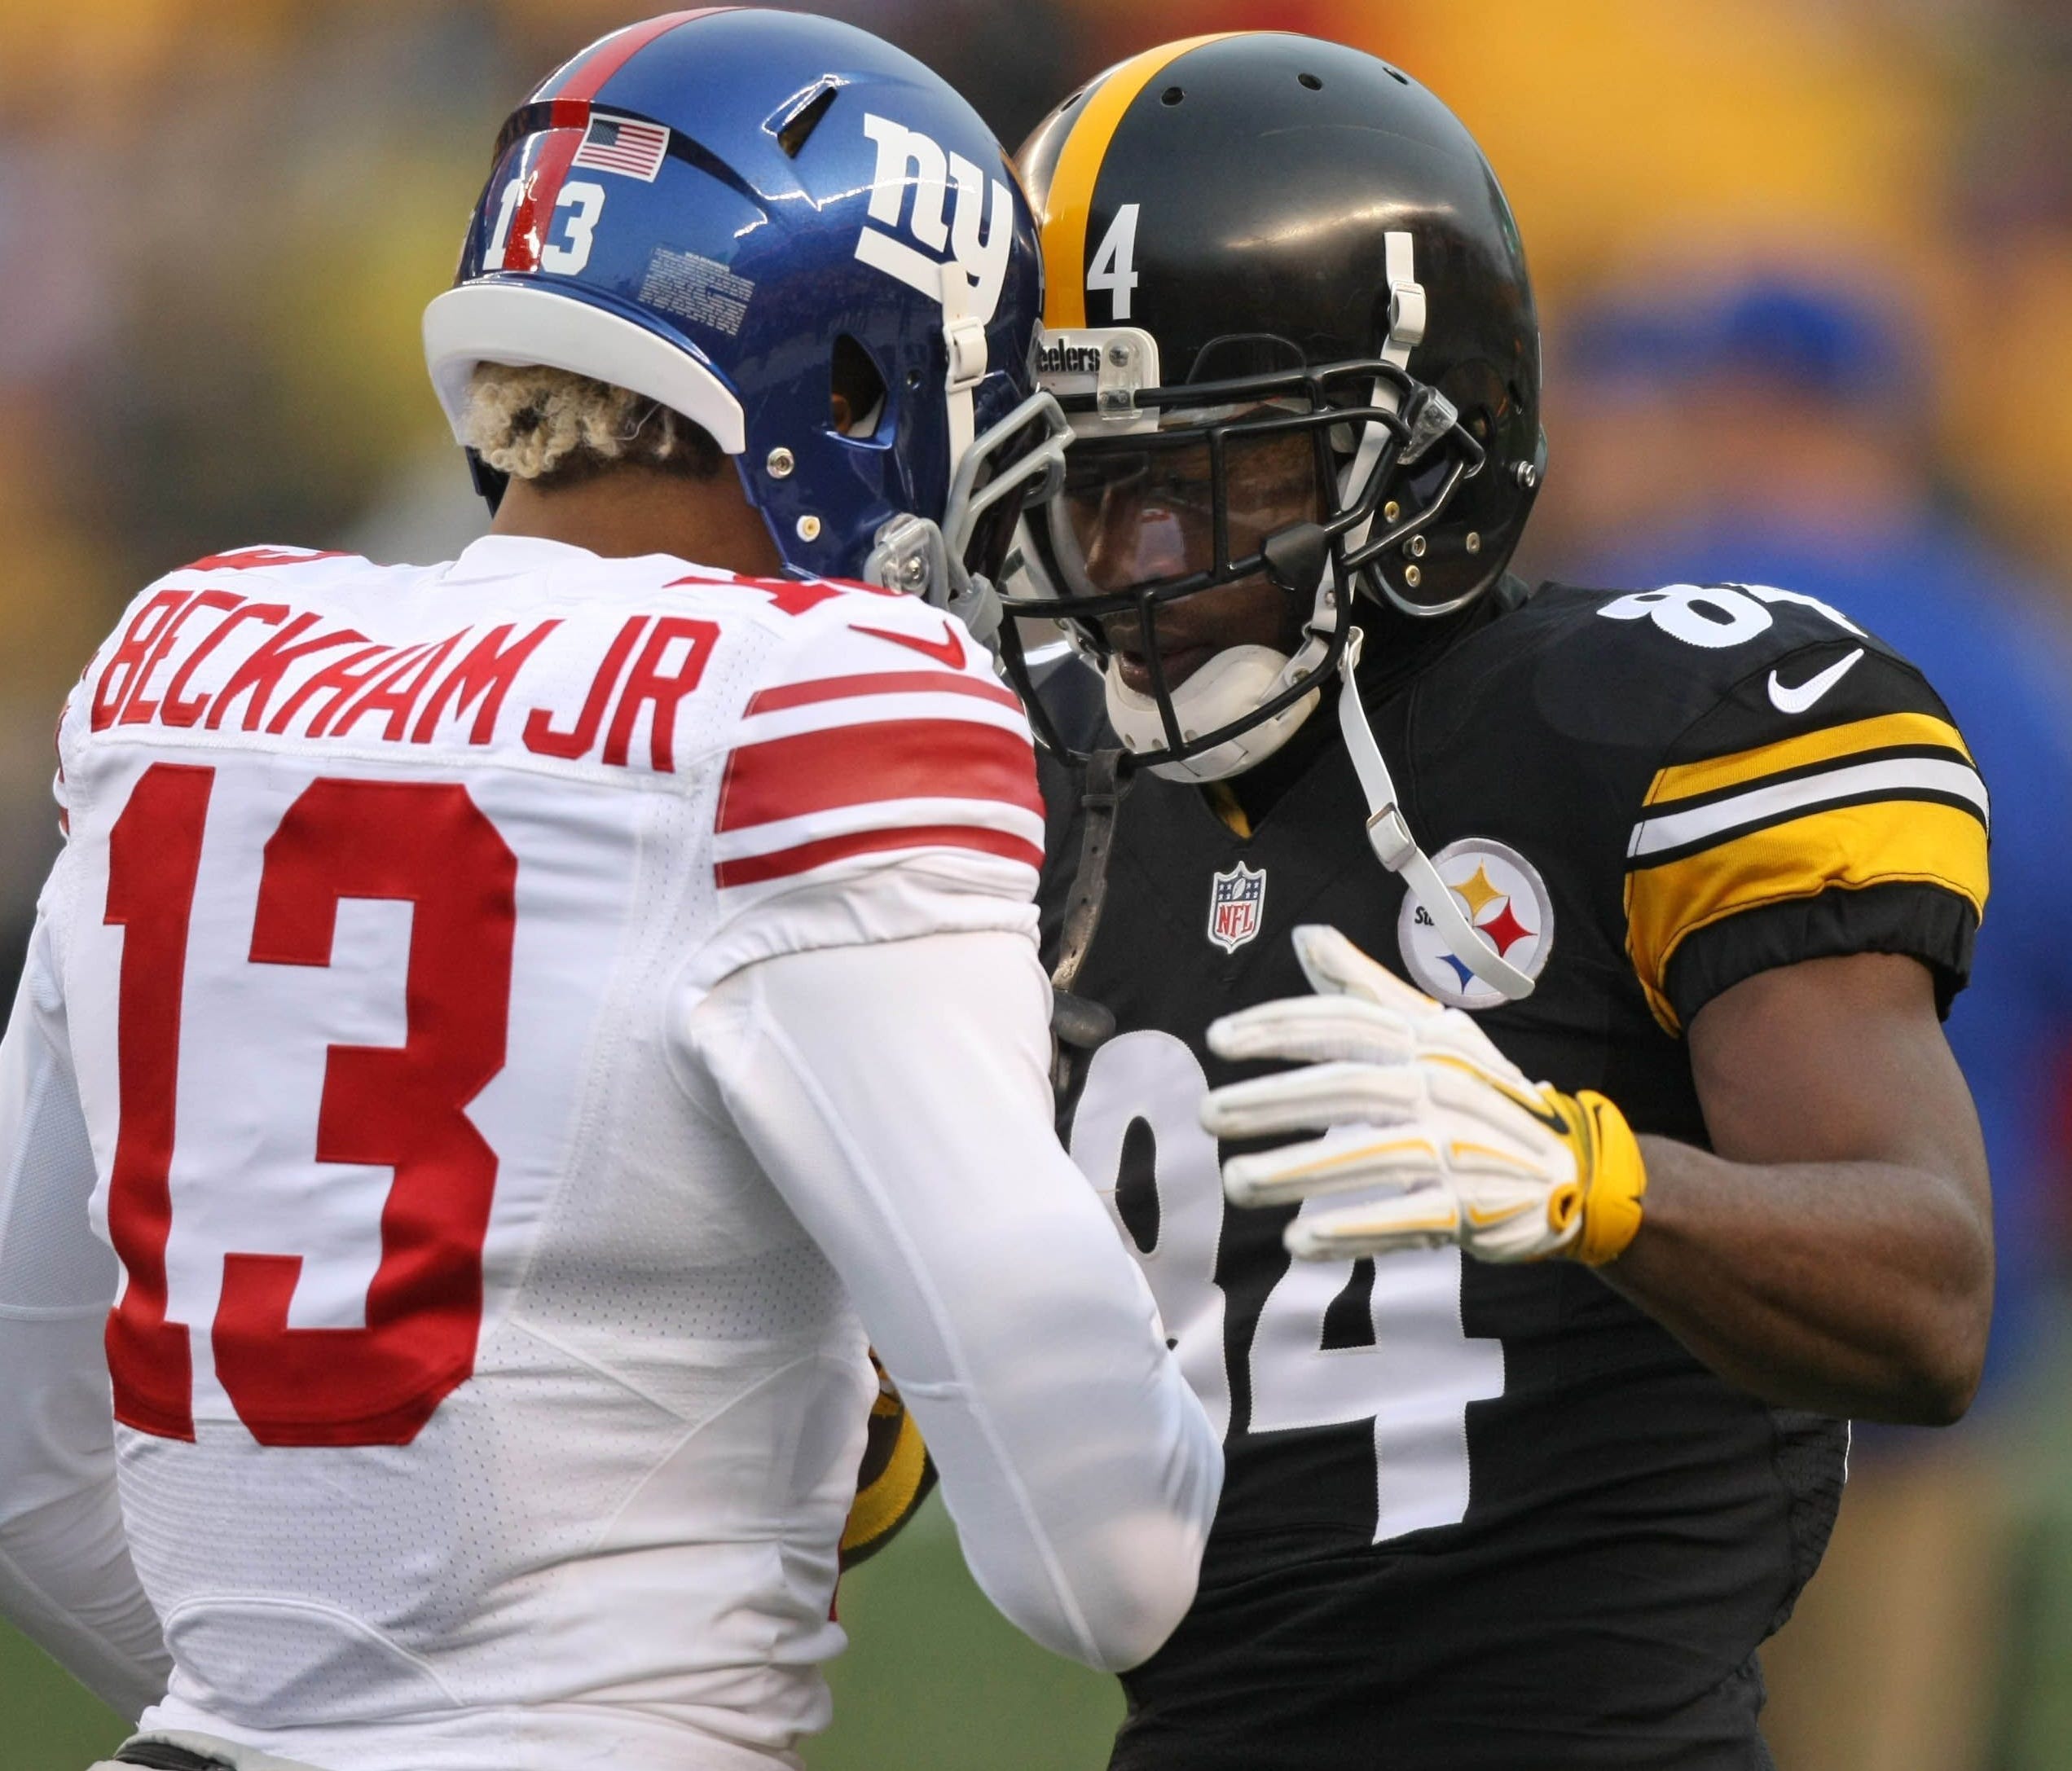 Giants WR Odell Beckham Jr. may soon supplant Pittsburgh's Antonio Brown as the NFL's top-paid receiver in terms of average salary.